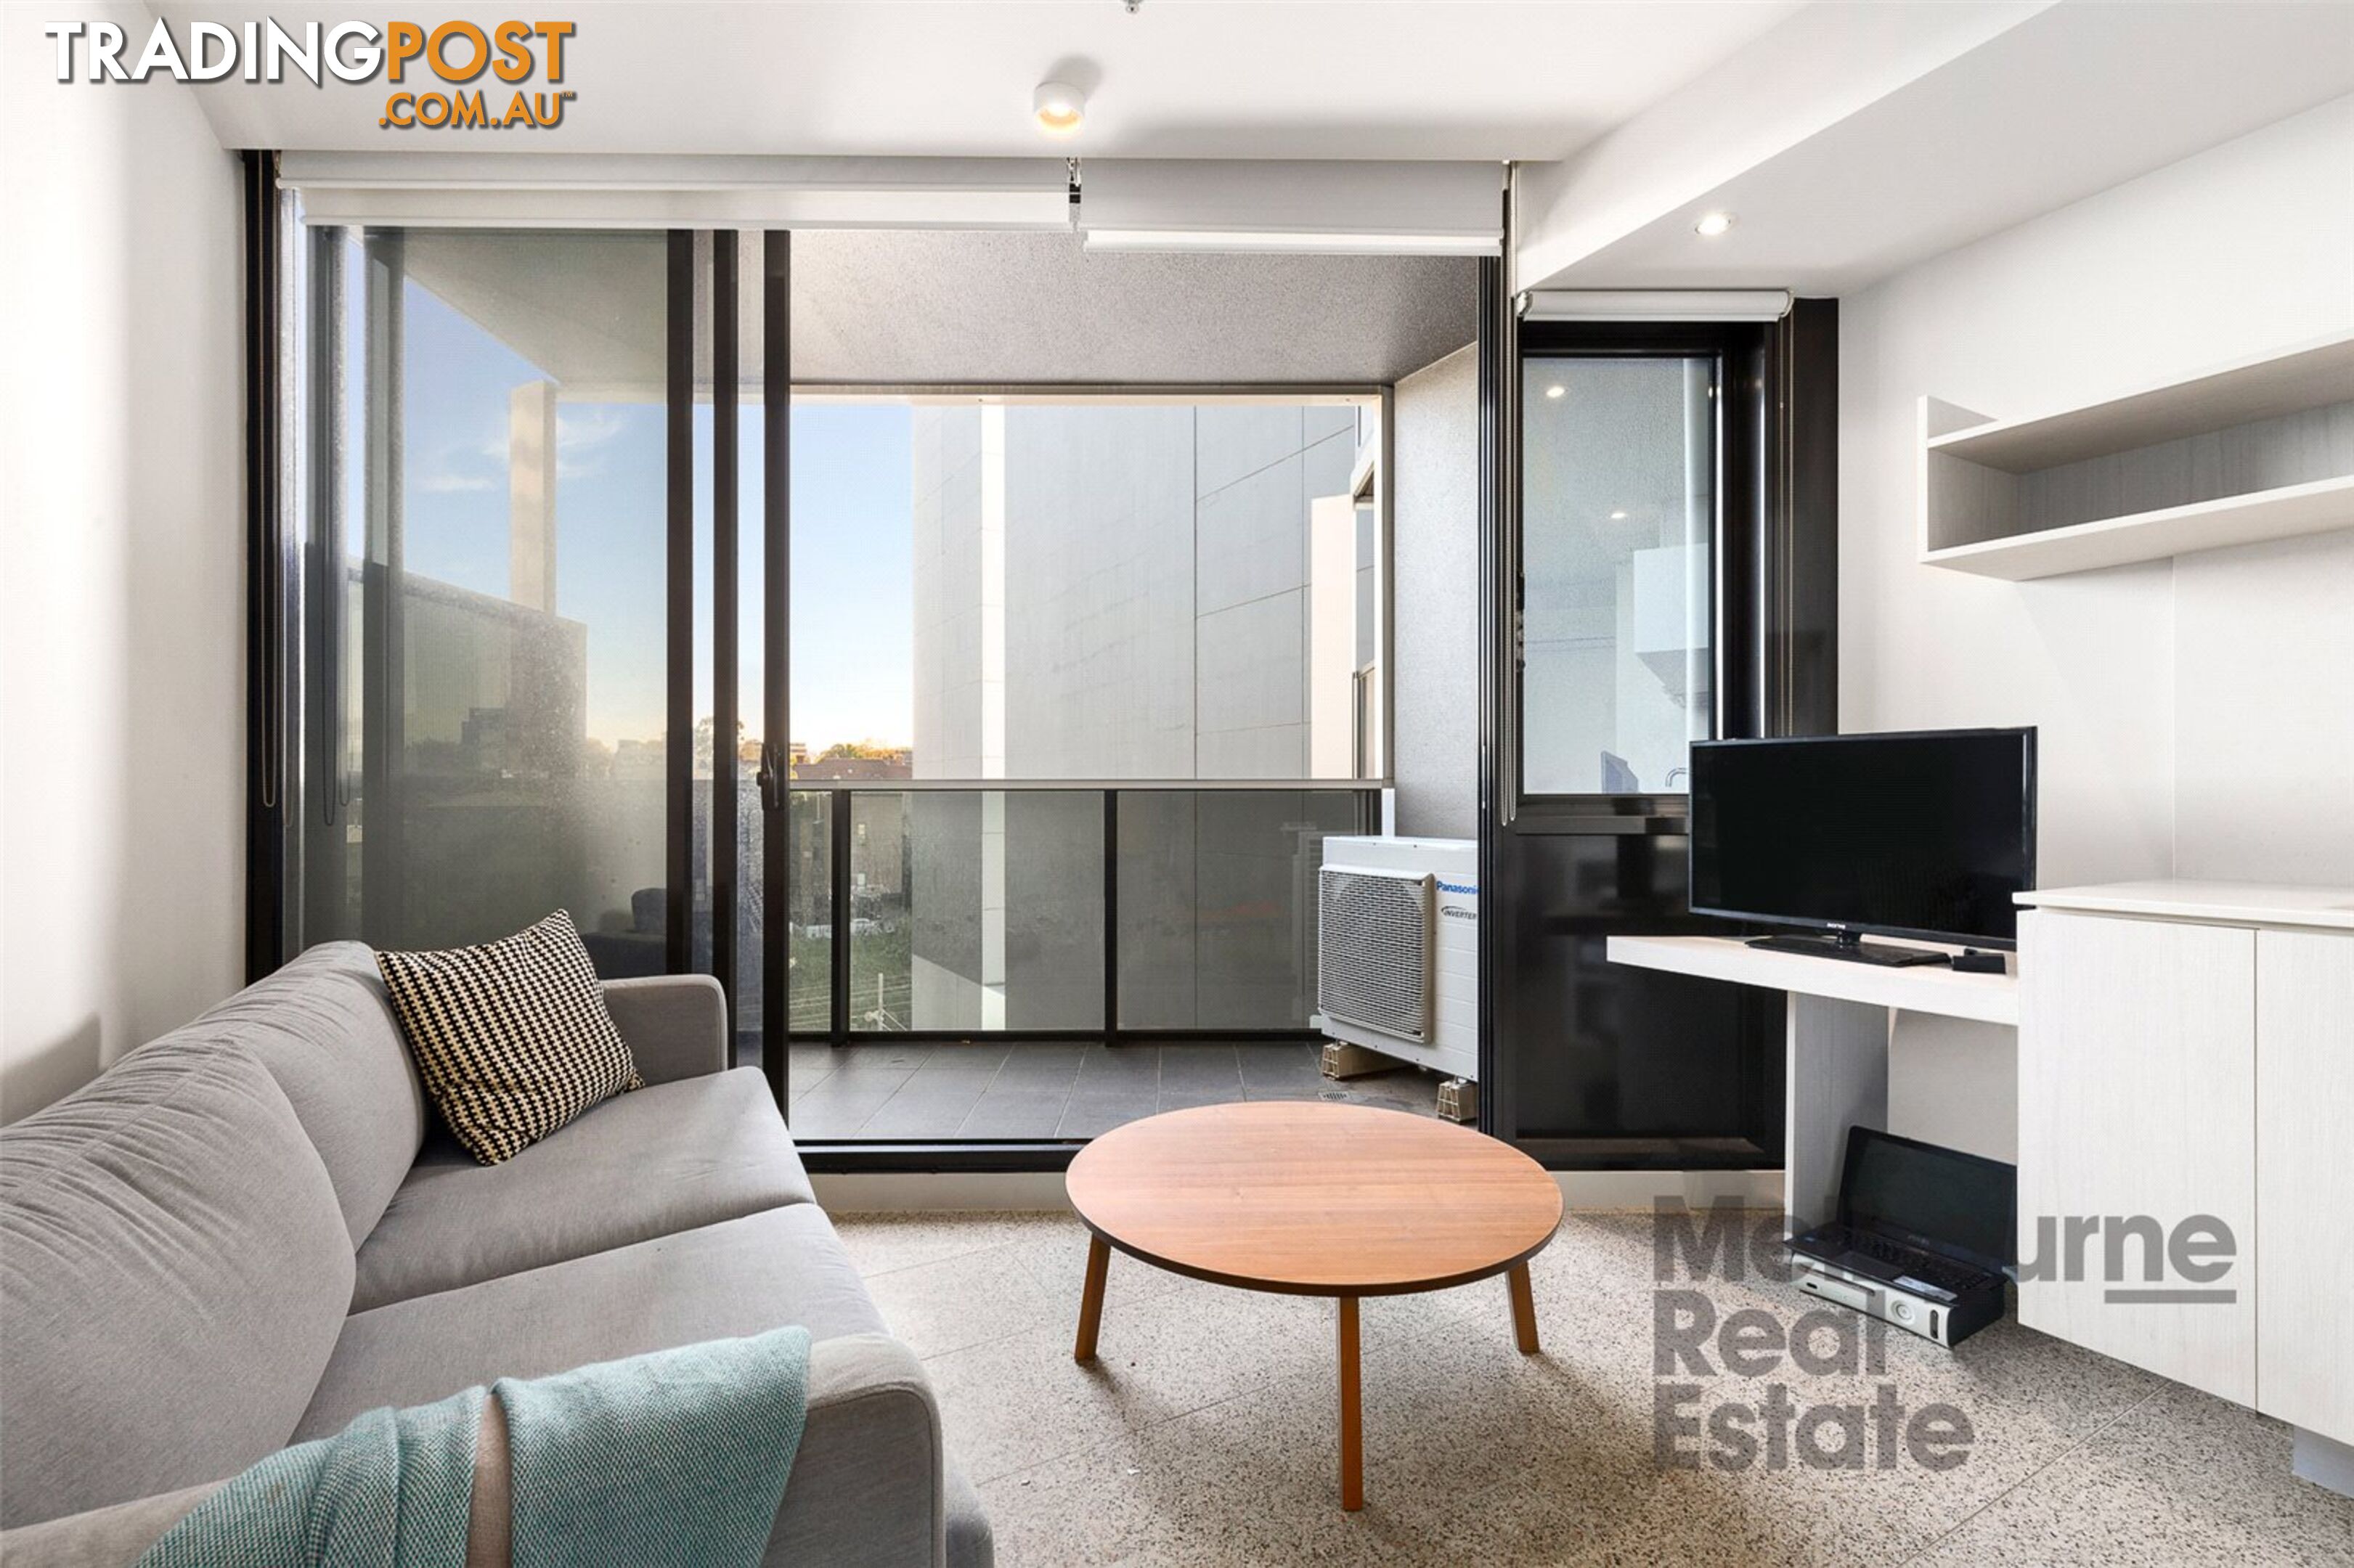 805/45 Claremont Street South Yarra VIC 3141